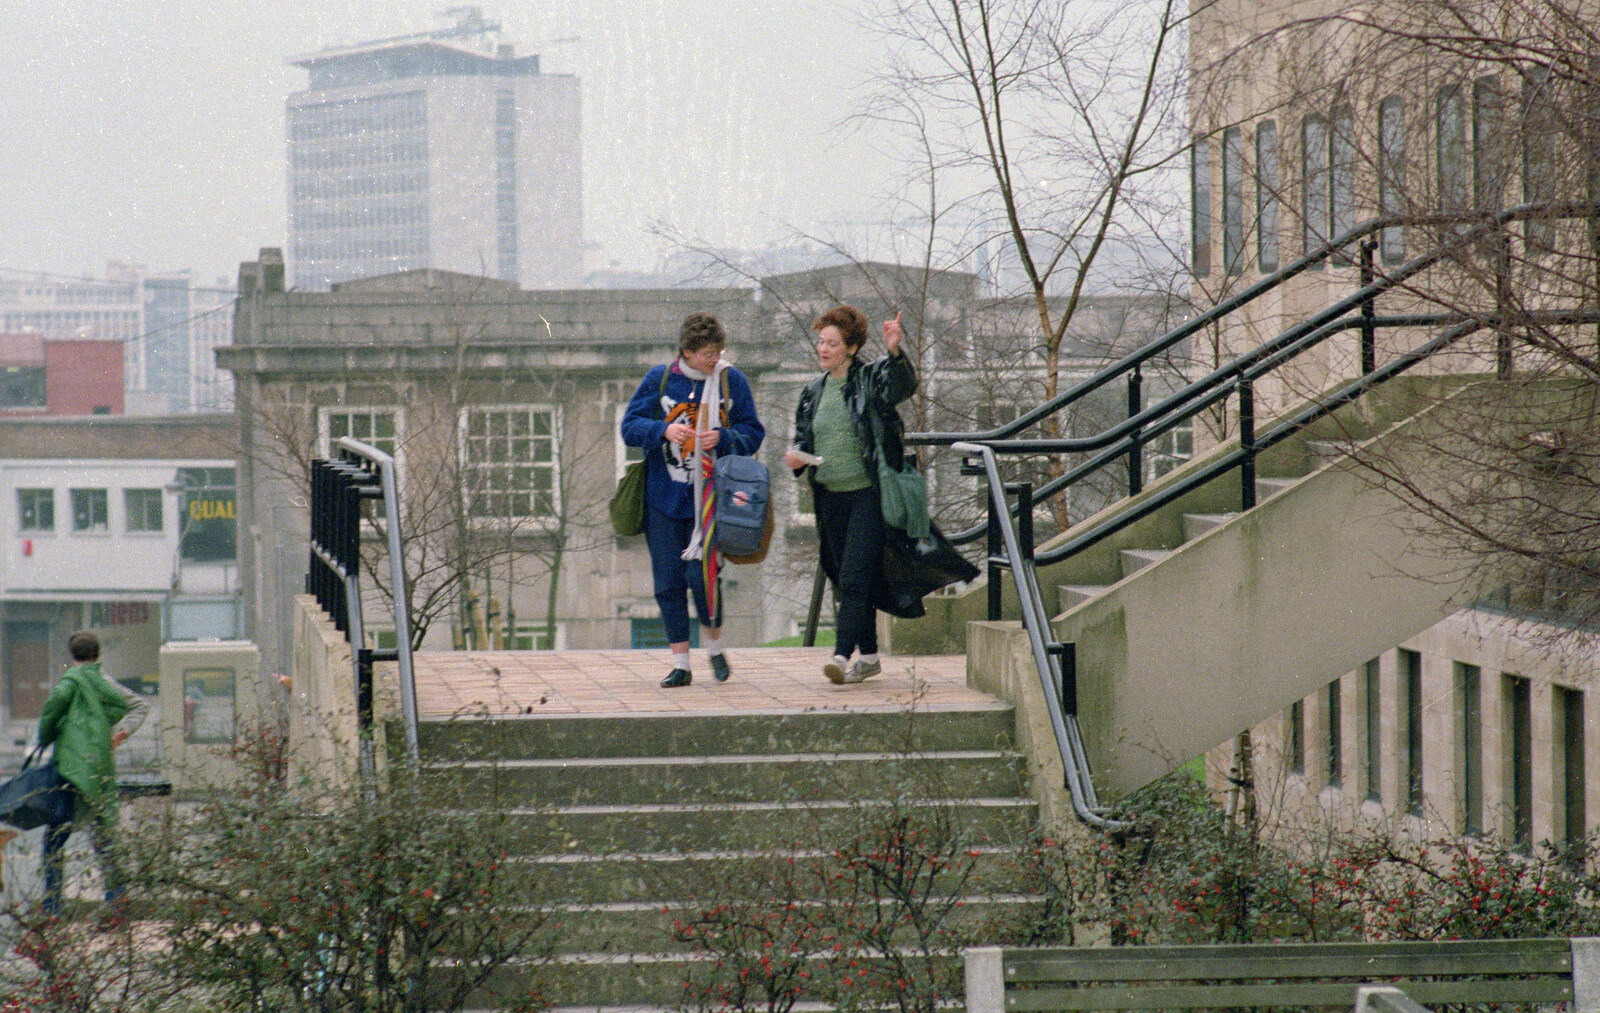 Barbara and a friend on the steps of the GTB from Uni: RAG Week Abseil, Hitch Hike, and Beaumont Street Life Plymouth, Devon - 13th February 1986